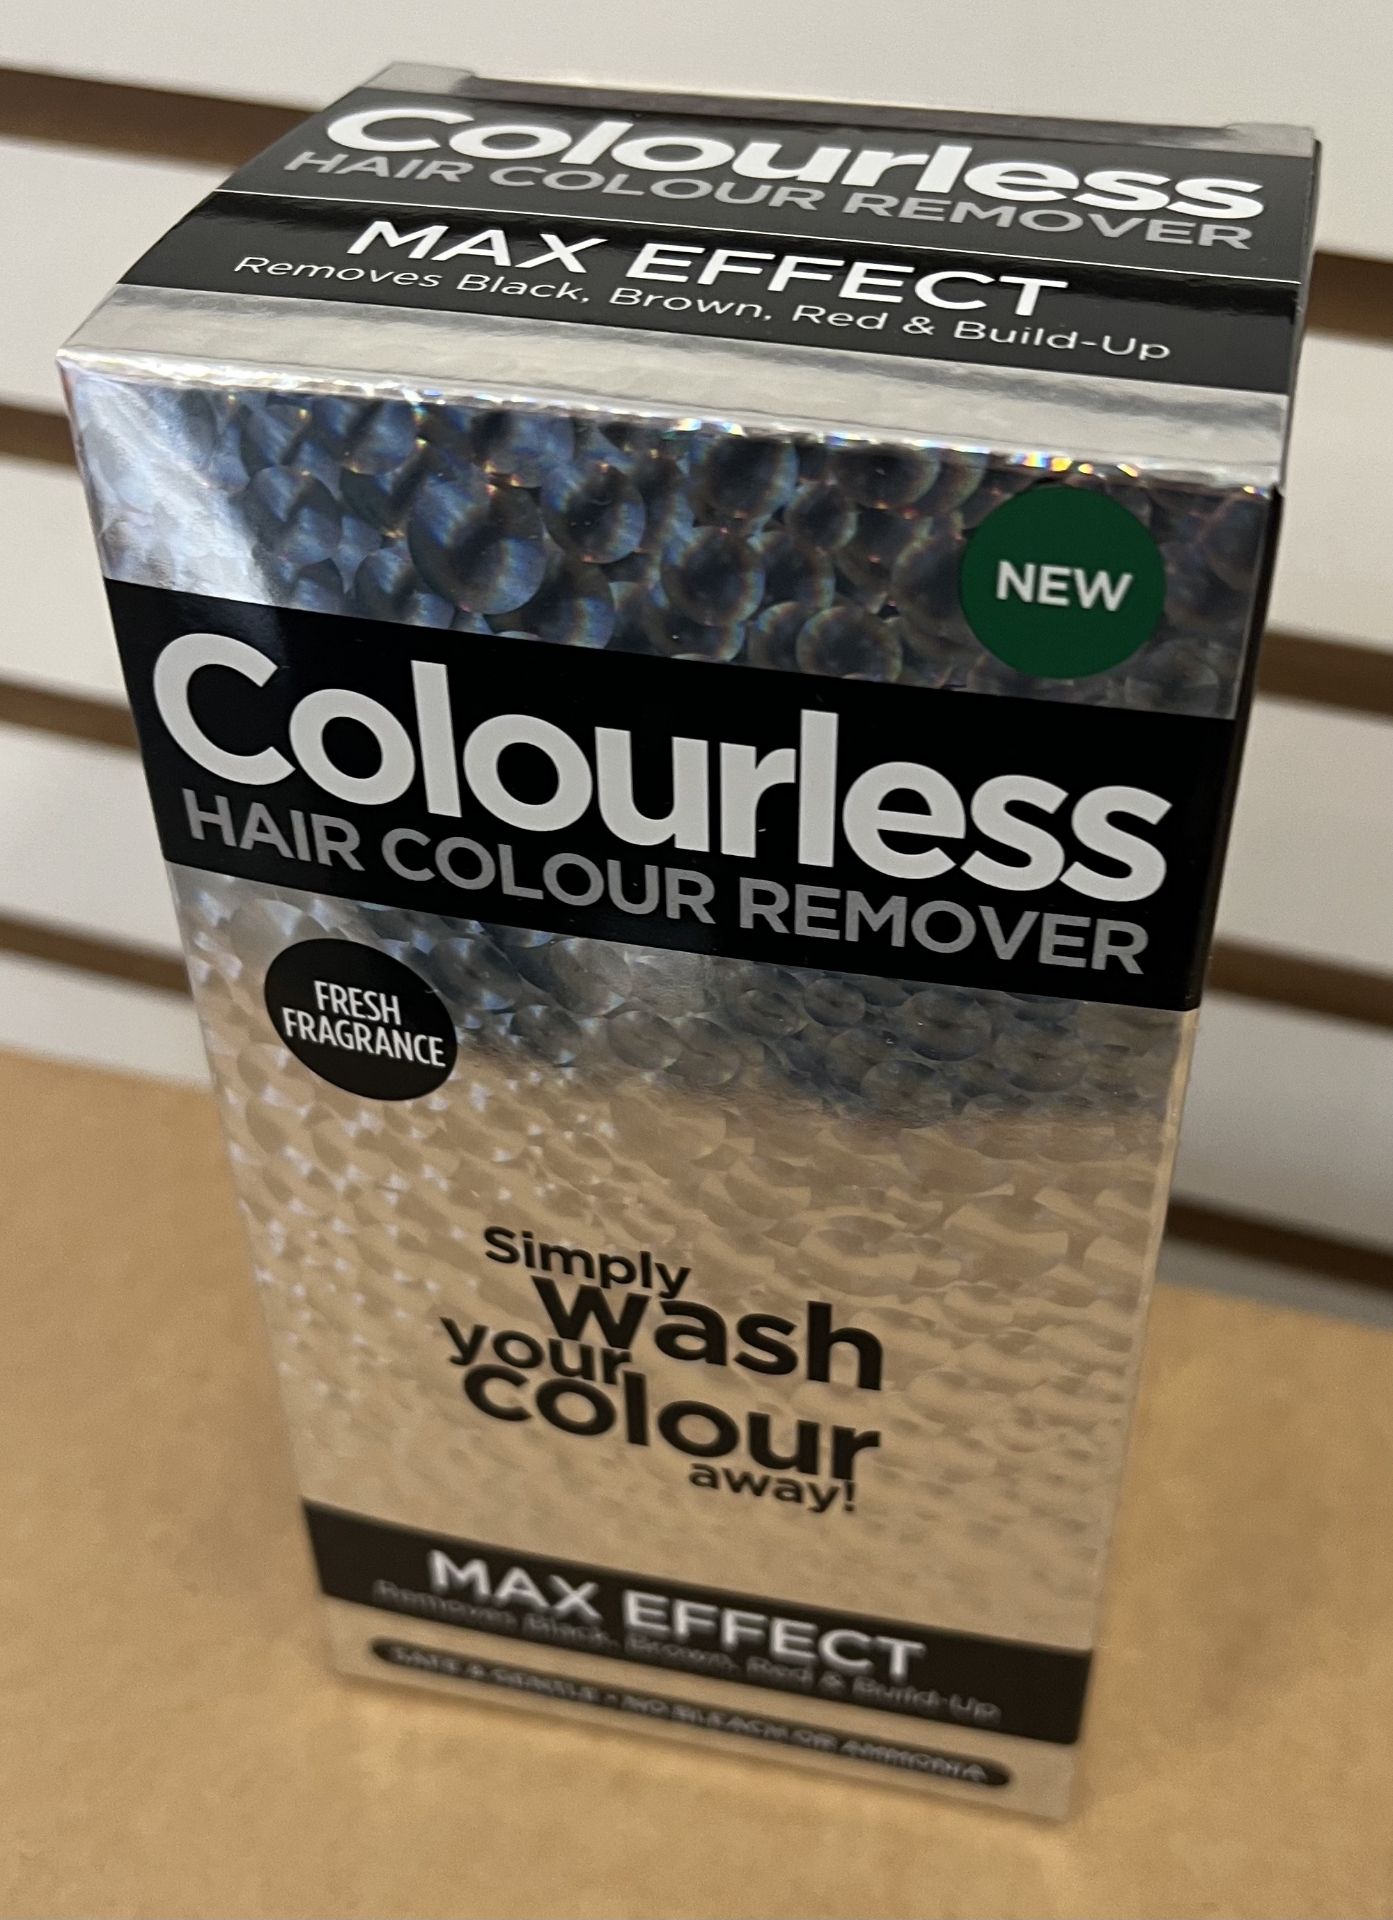 36 x Revolution London Colourless Max Effect Hair Colour Remover - Image 4 of 7